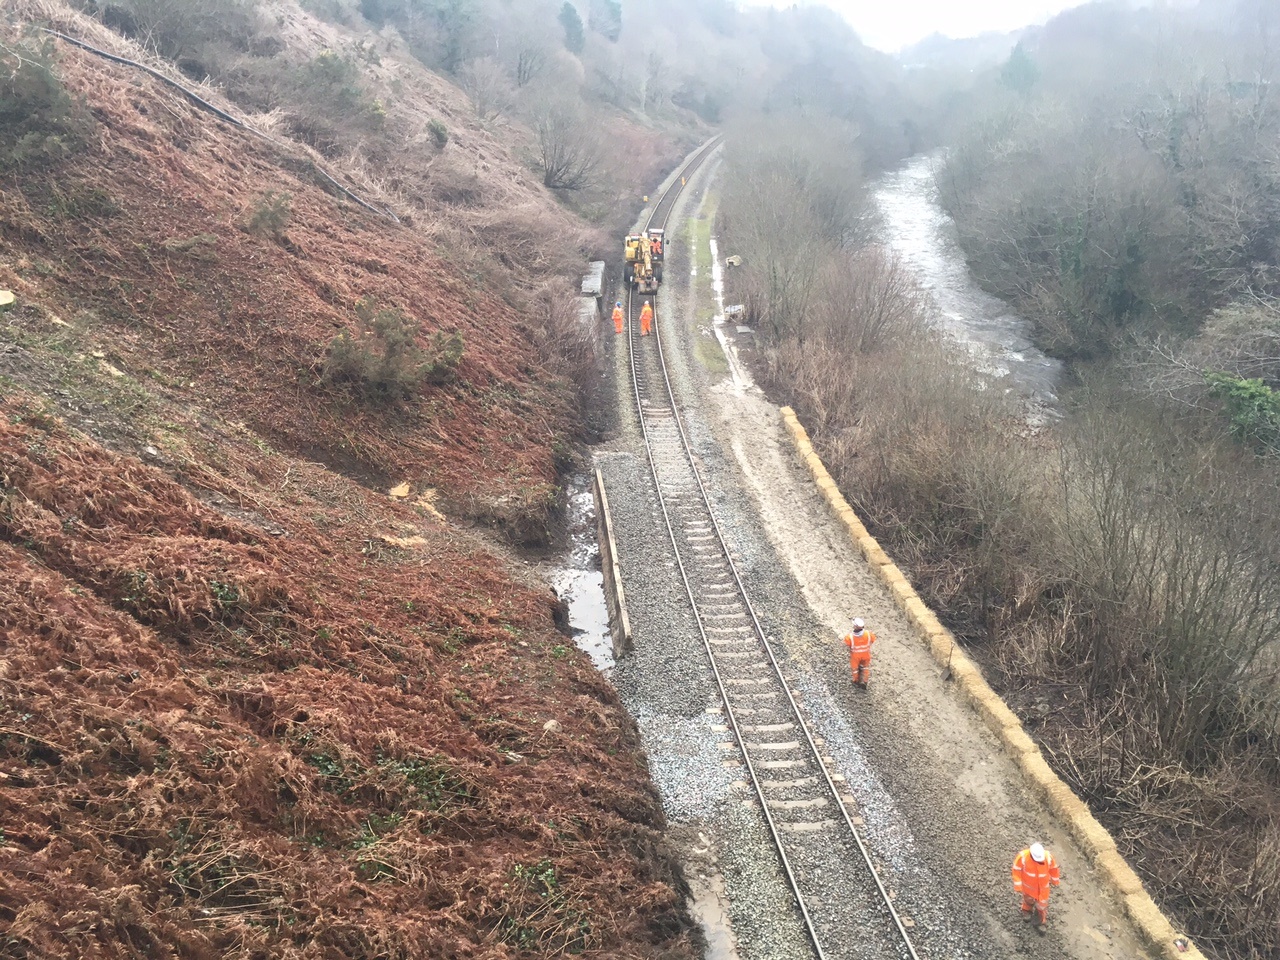 Network Rail engineers have removed over 150 tonnes of debris from the line between Porth and Treherbert